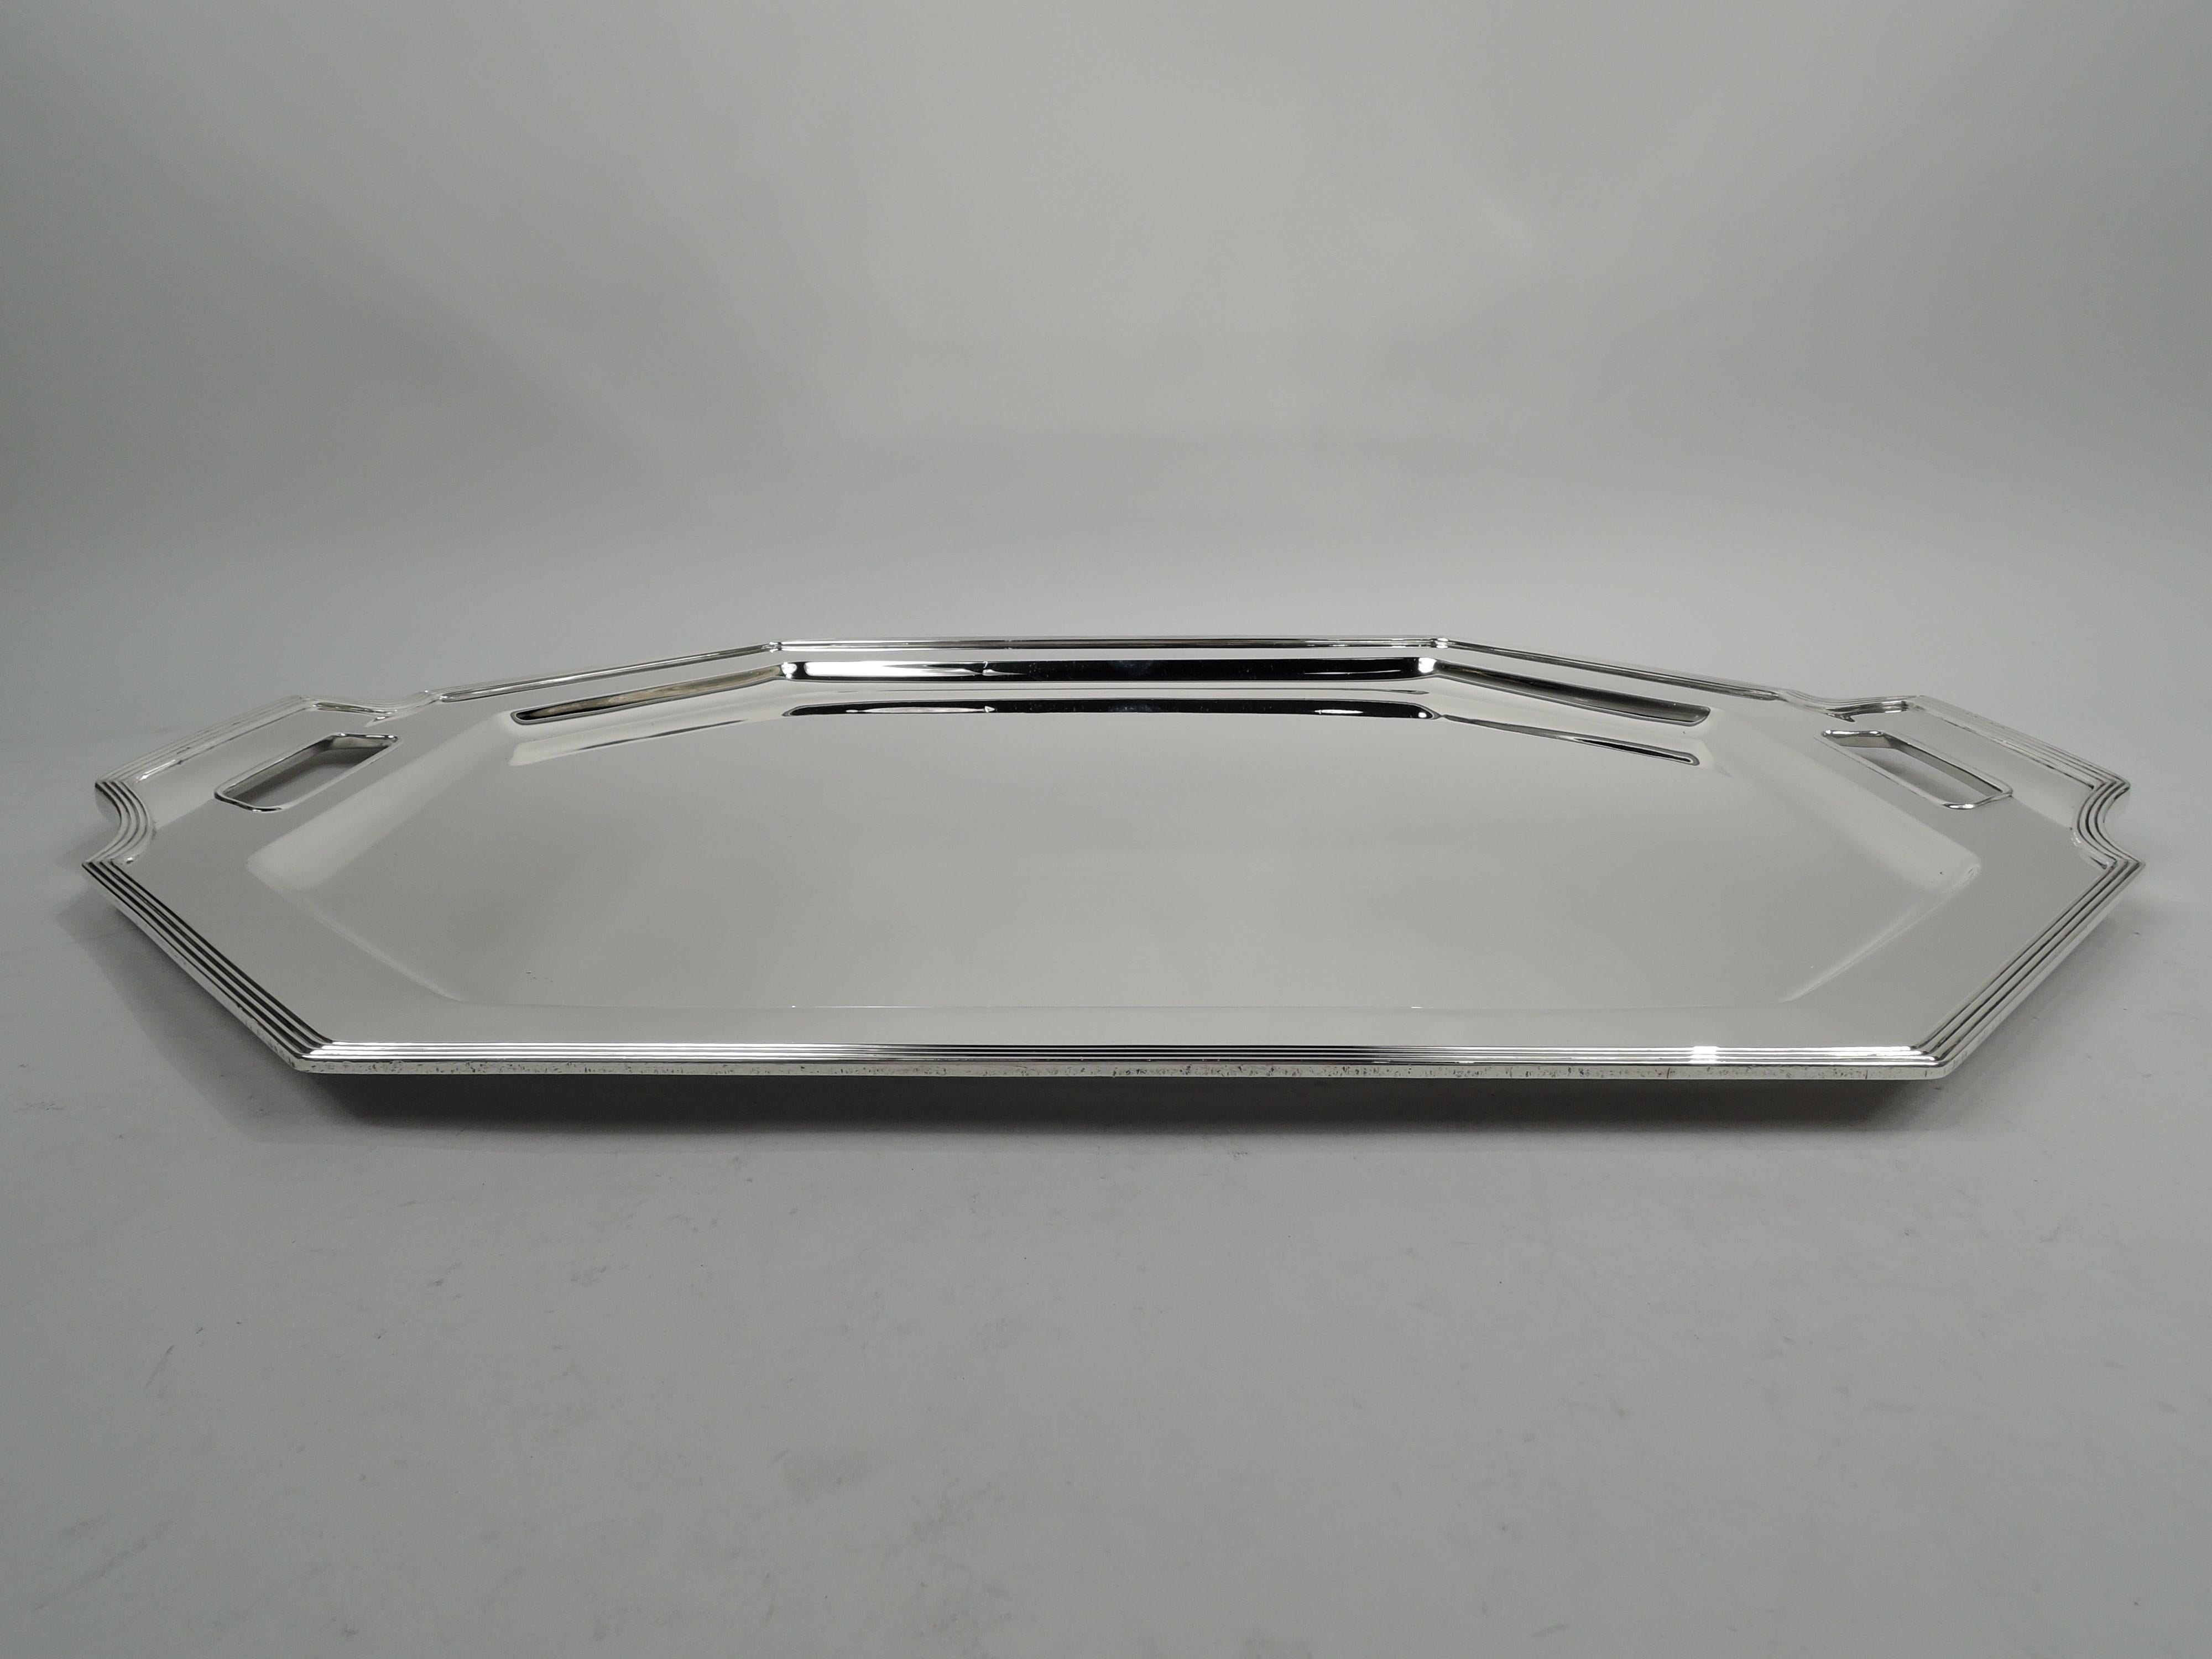 Large and heavy Art Deco sterling silver tea tray. Made by Tiffany & Co. in New York, circa 1916. Rectangular well with chamfered corners, wide shoulder, and reeded rim; curvilinear ends with cutout trapezoidal handles. A striking design that would